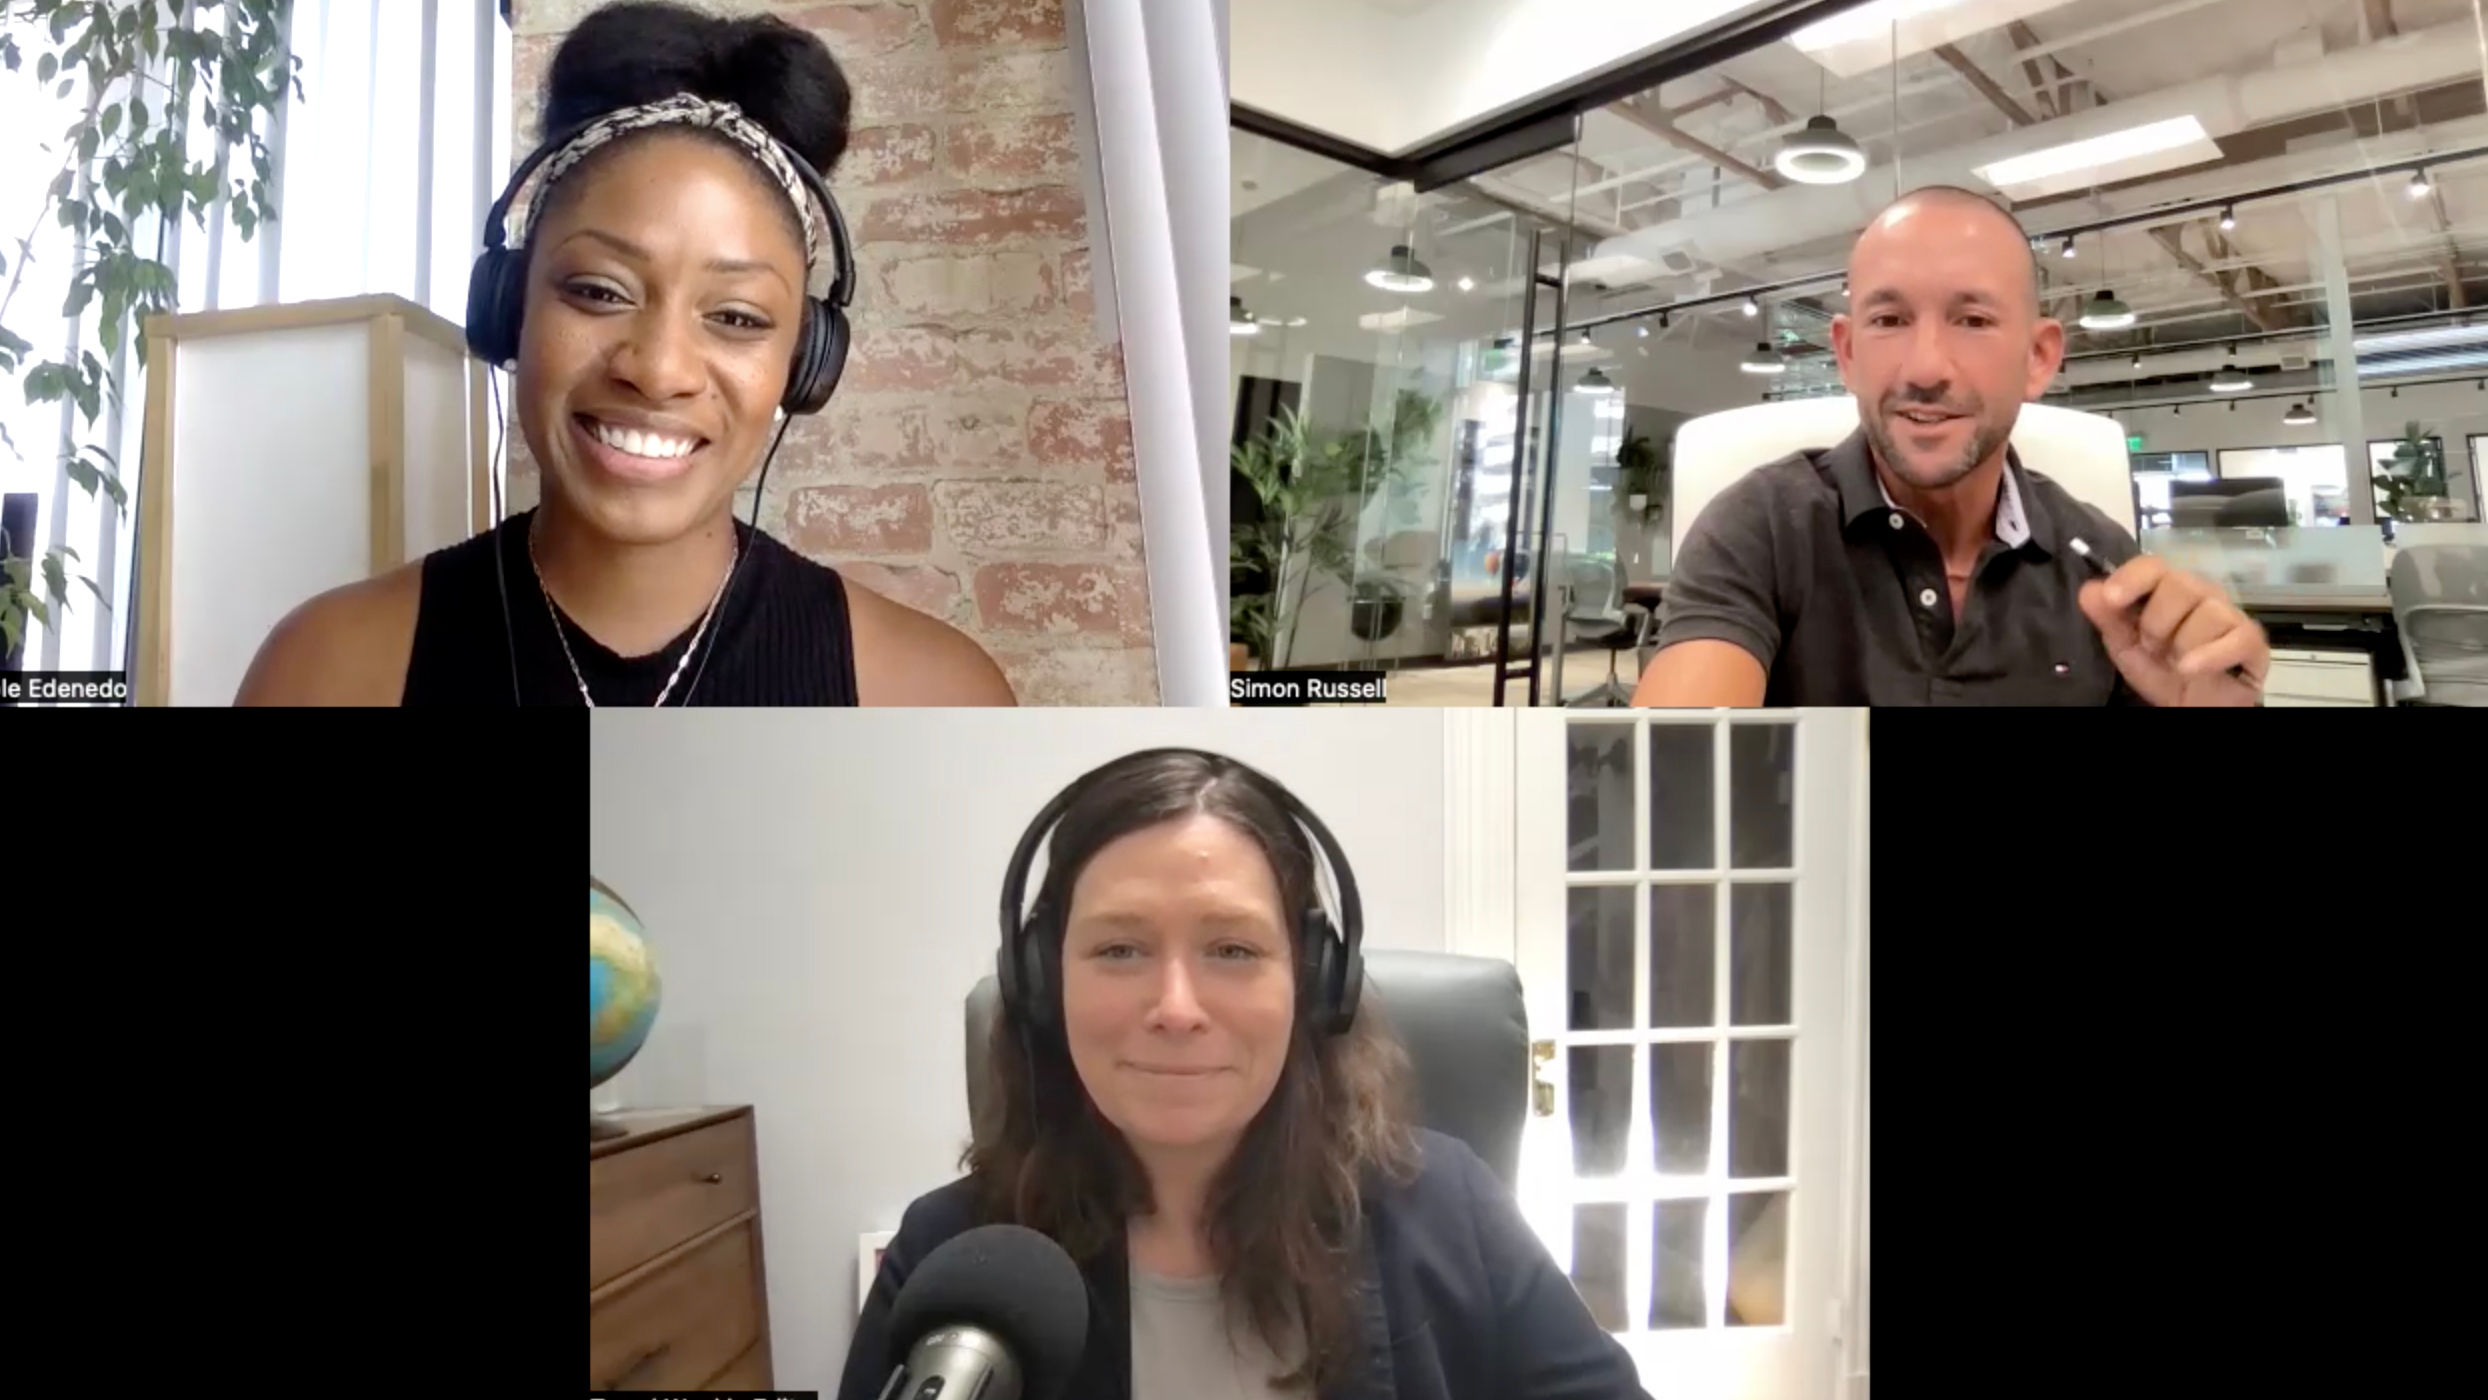 Nicole Edenedo, Authentic Vacations' Simon Russell and Rebecca Tobin on the Folo by Travel Weekly podcast to talk about charging tour clients a pre-booking deposit.